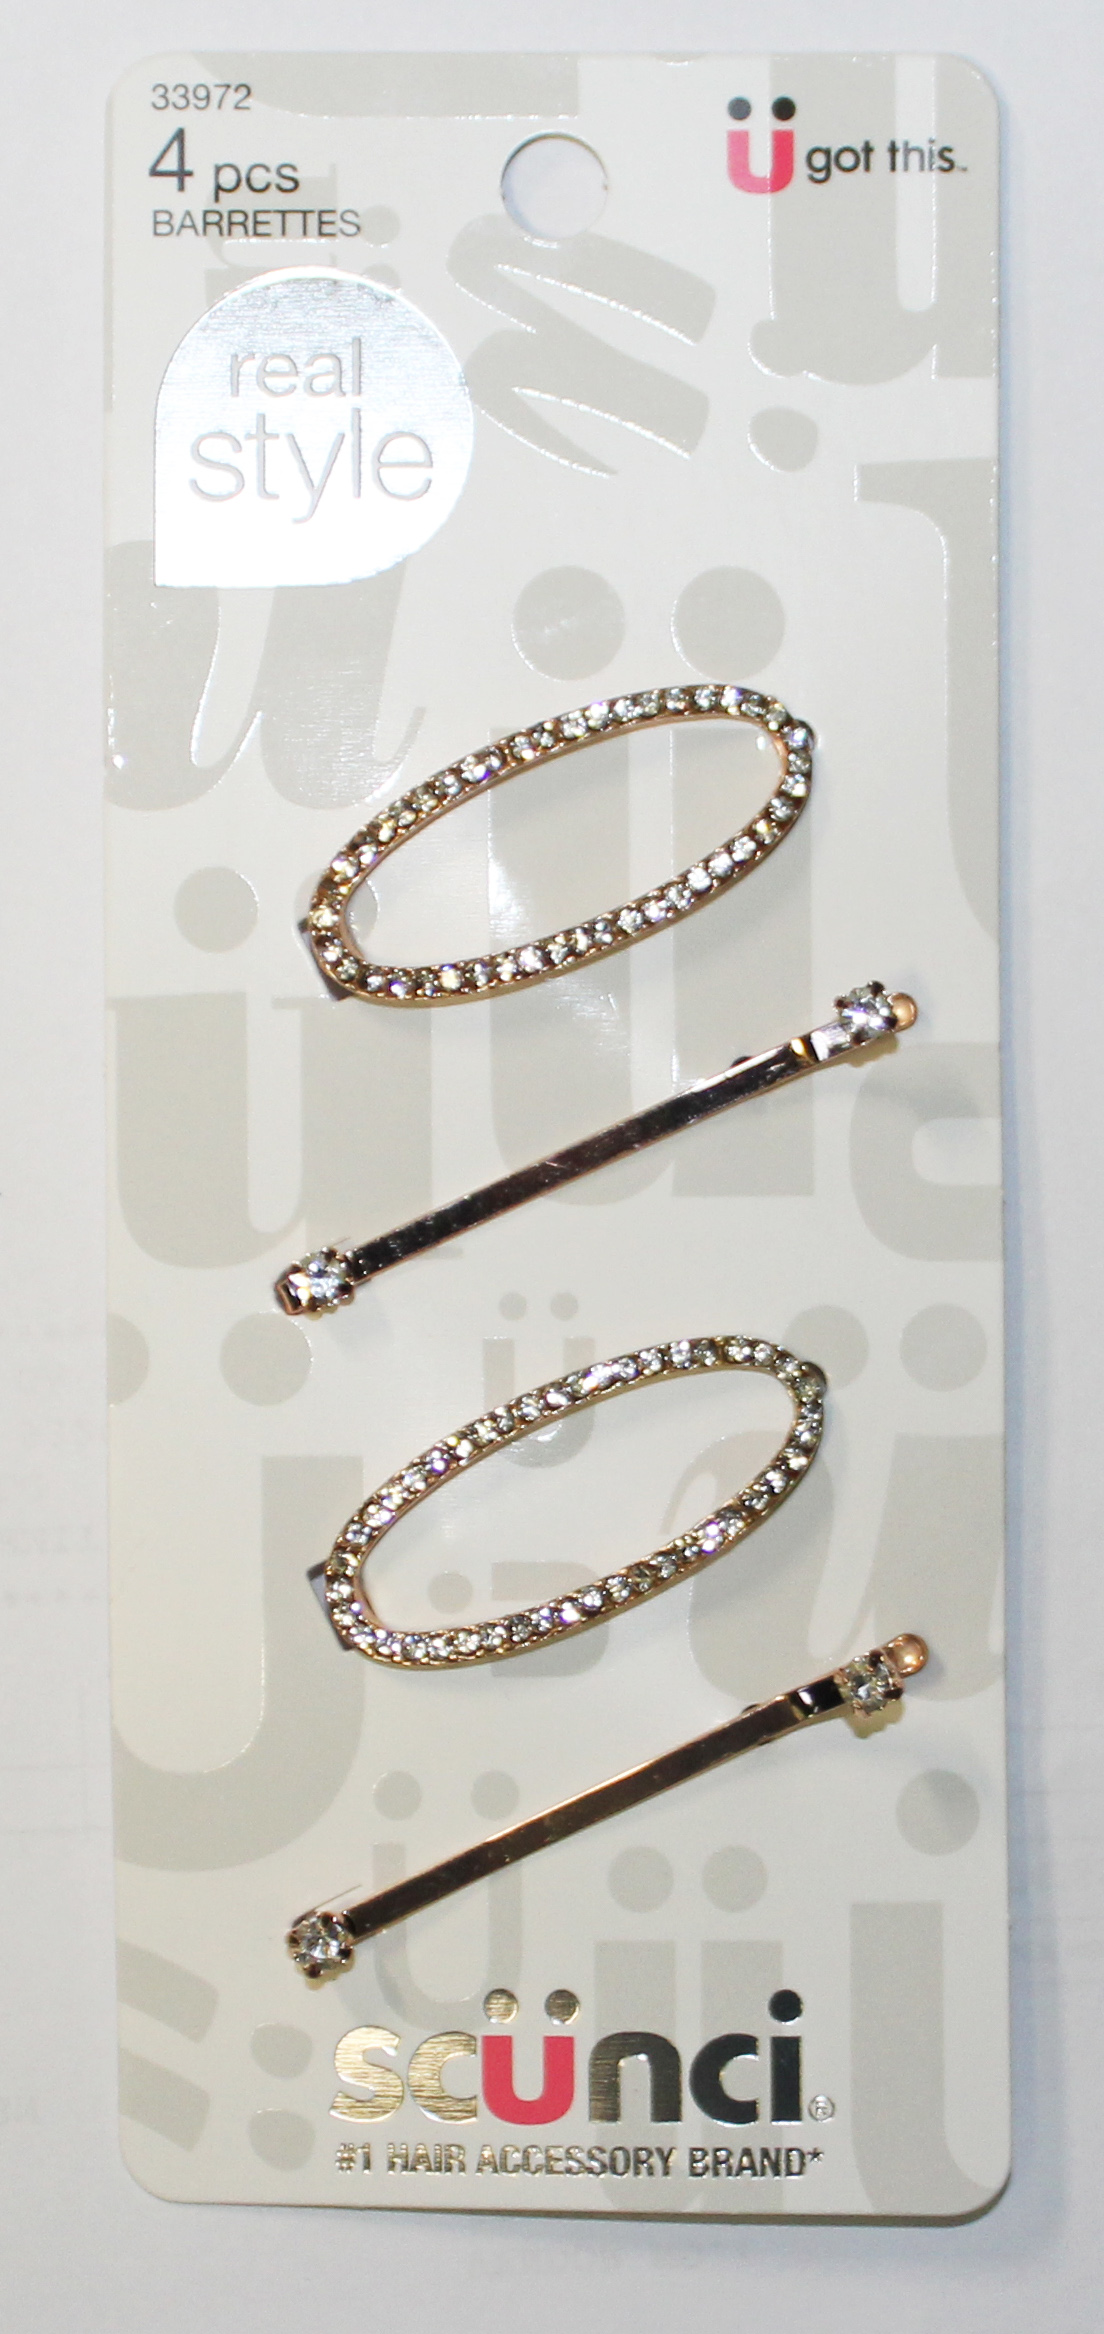 Scunci Bling Bobby Pin & Barrette, 4 Count Pack - Click Image to Close